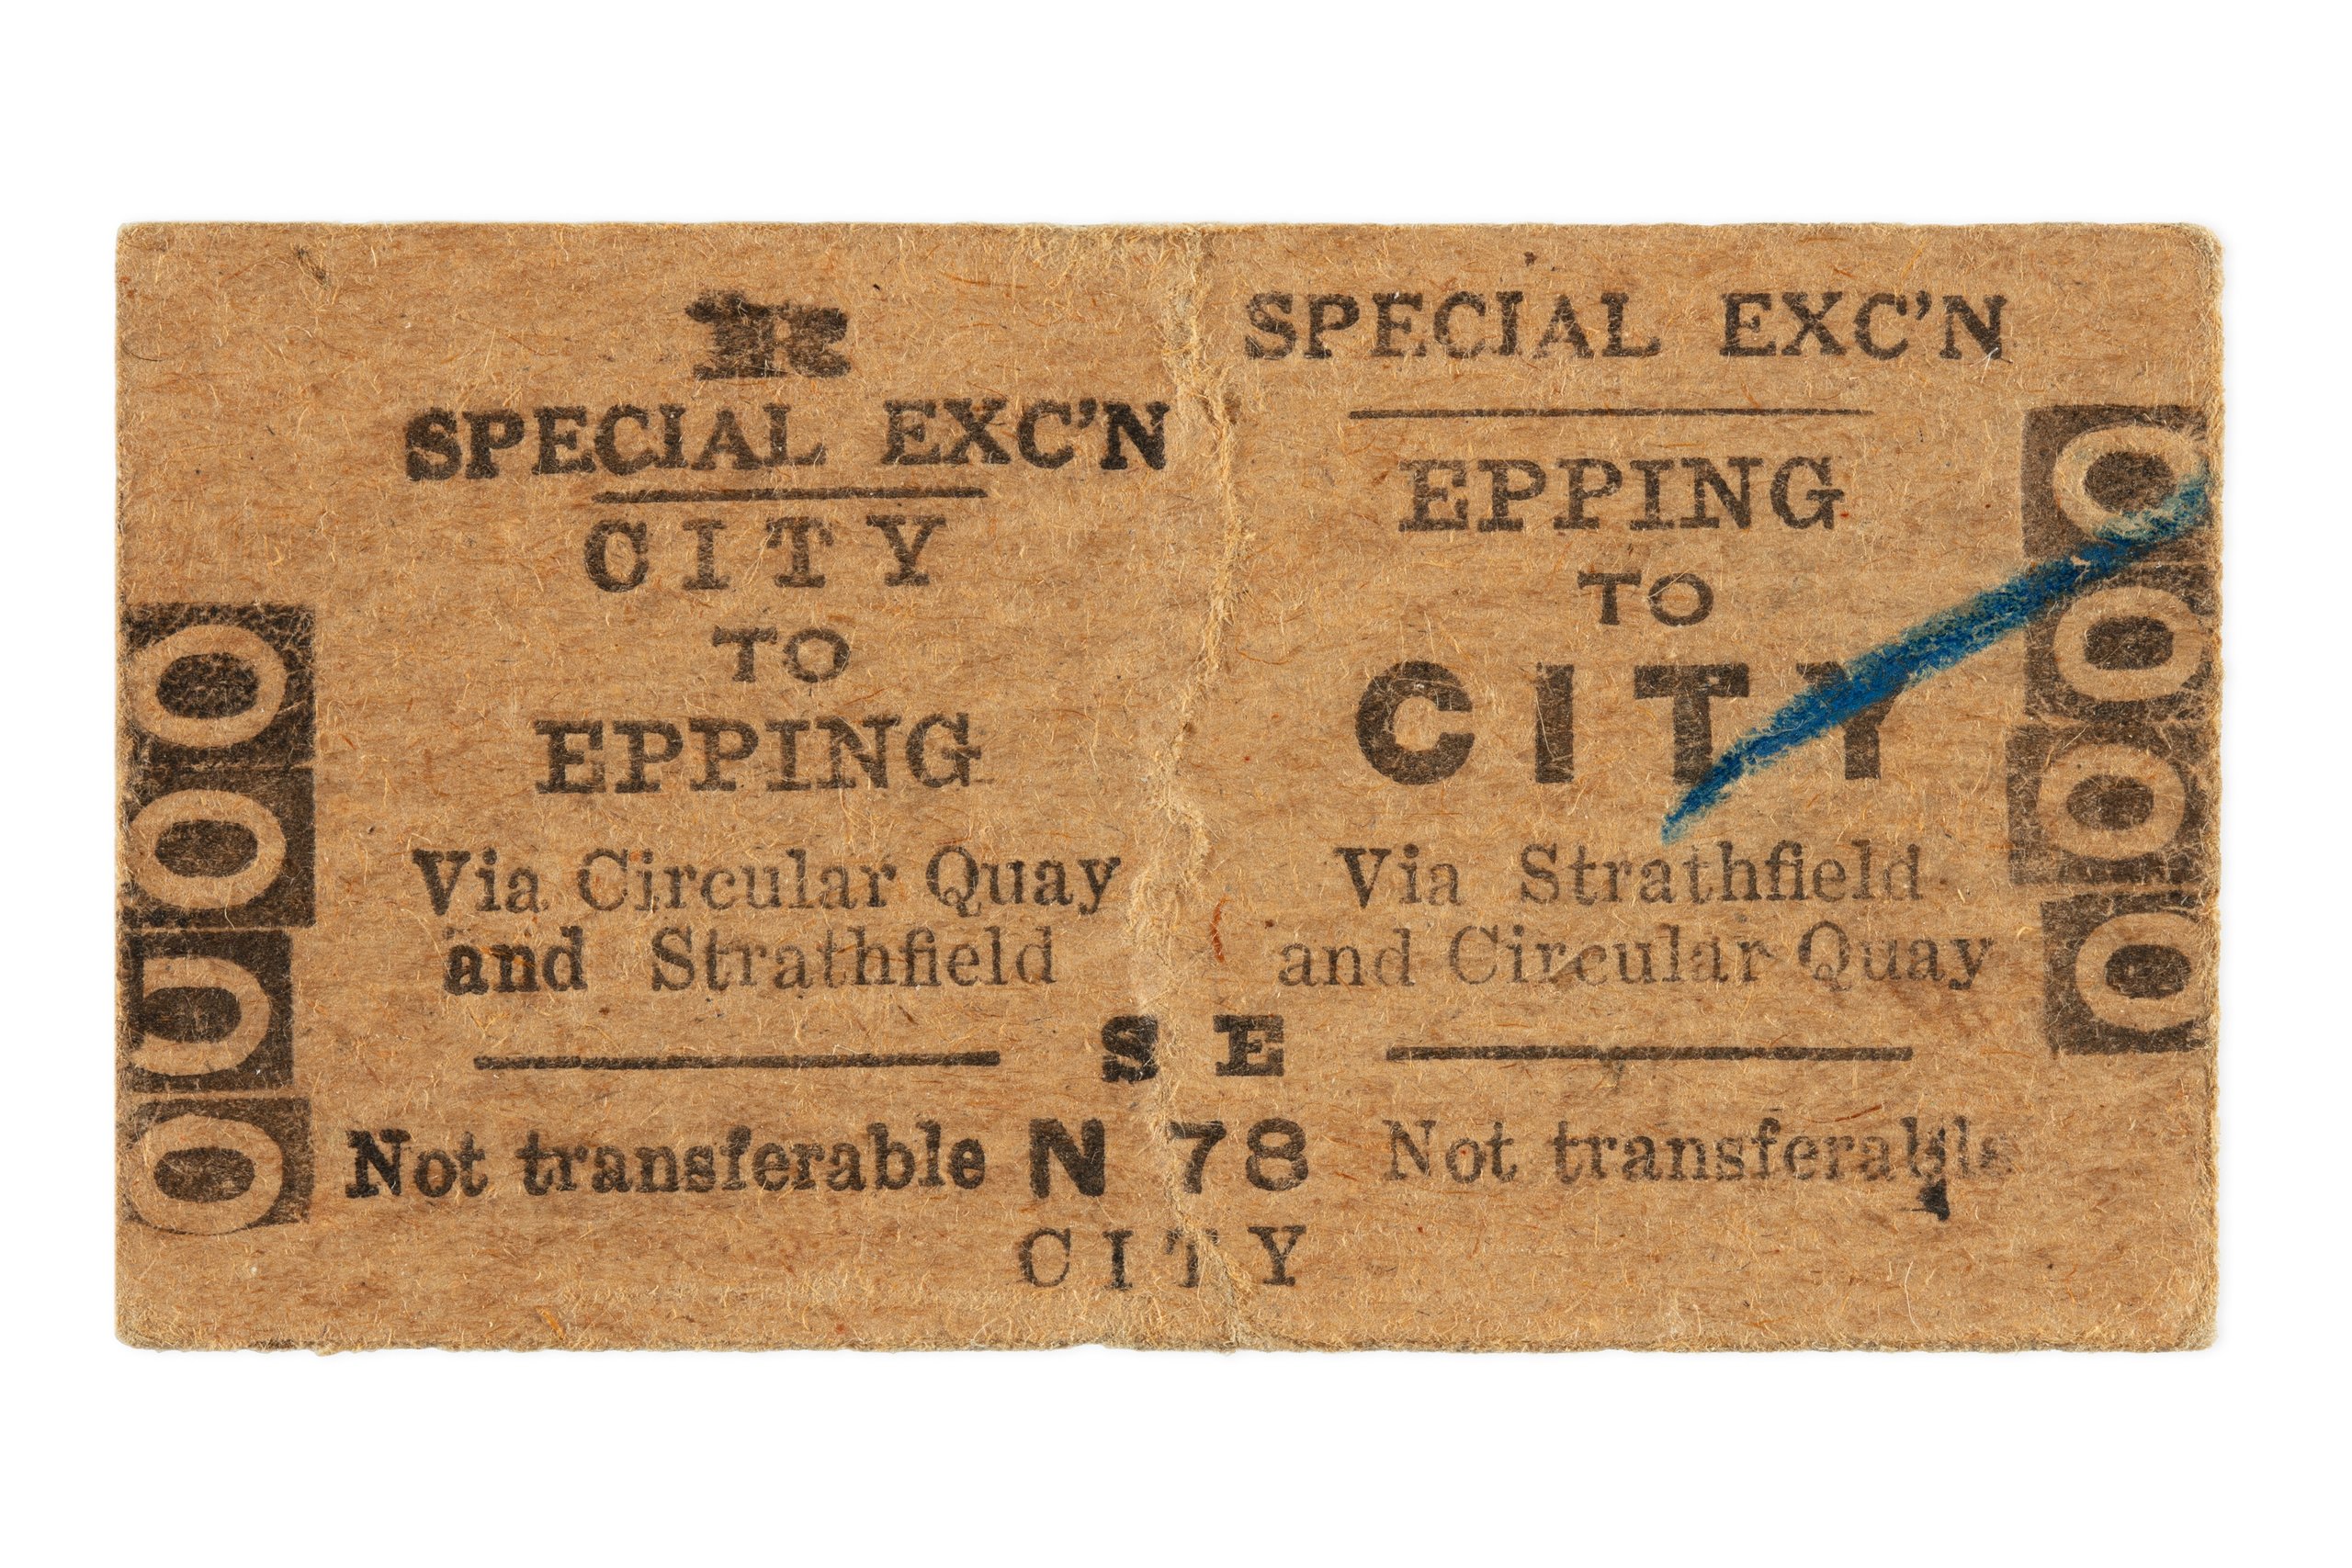 Train ticket from the first day of operation of Circular Quay railway station